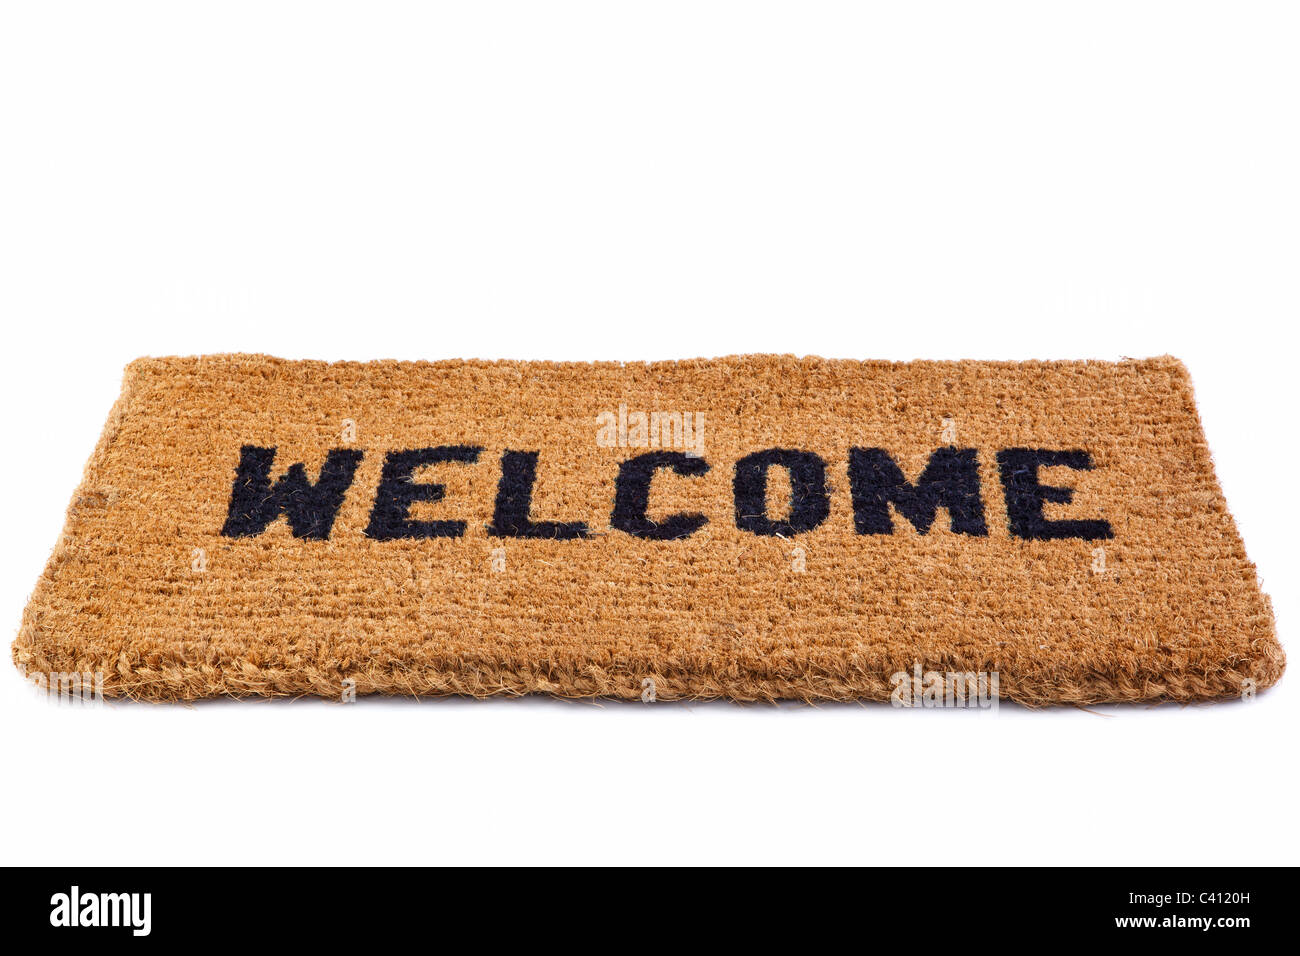 https://c8.alamy.com/comp/C4120H/photo-of-a-welcome-door-mat-isolated-on-a-white-background-C4120H.jpg